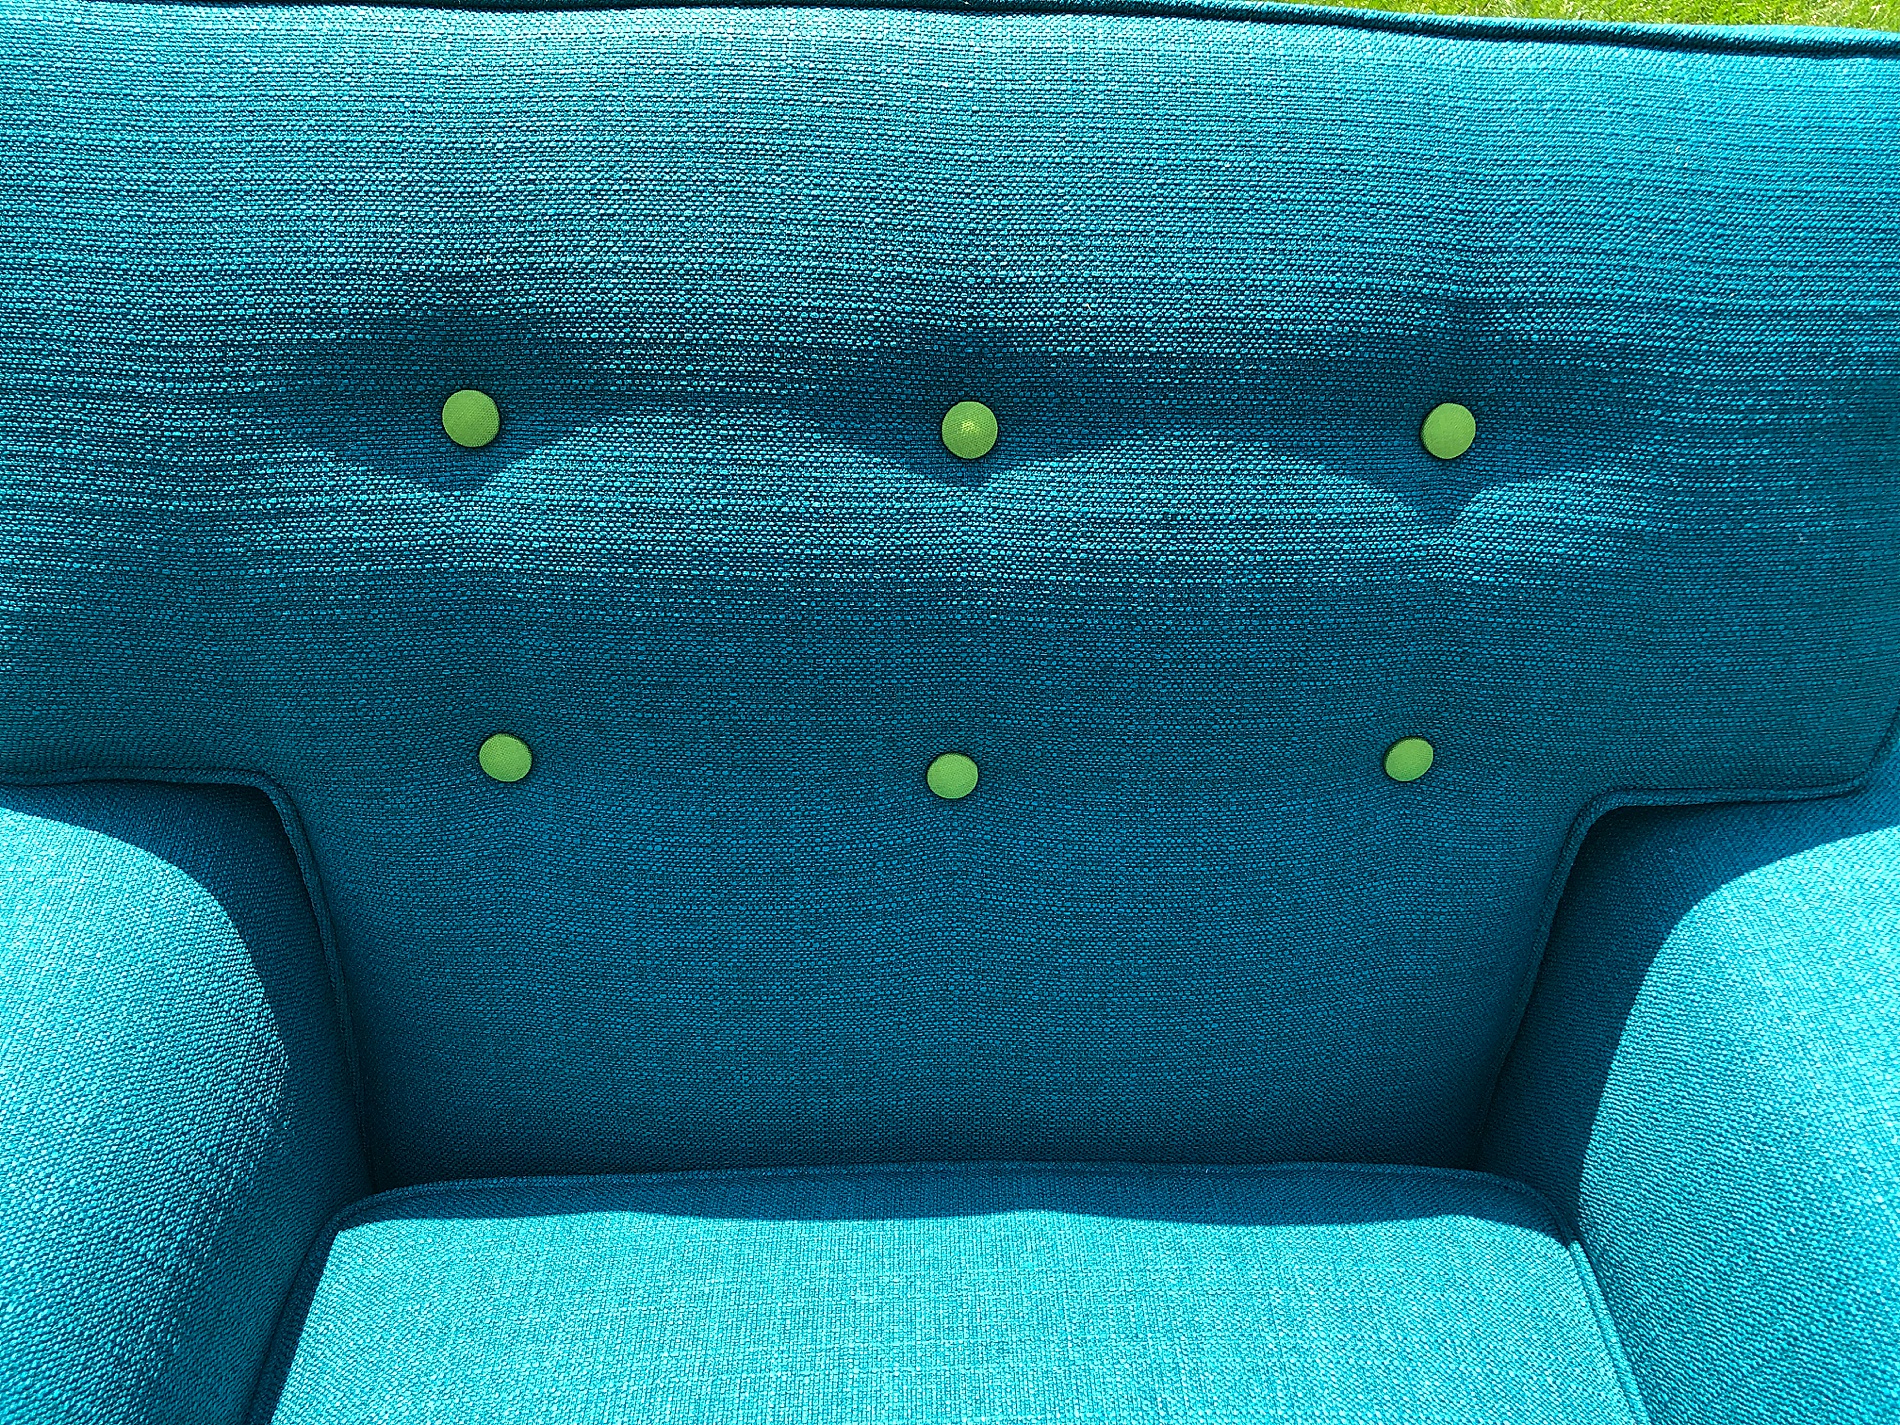 contrasting decorative buttons to make a chair pop